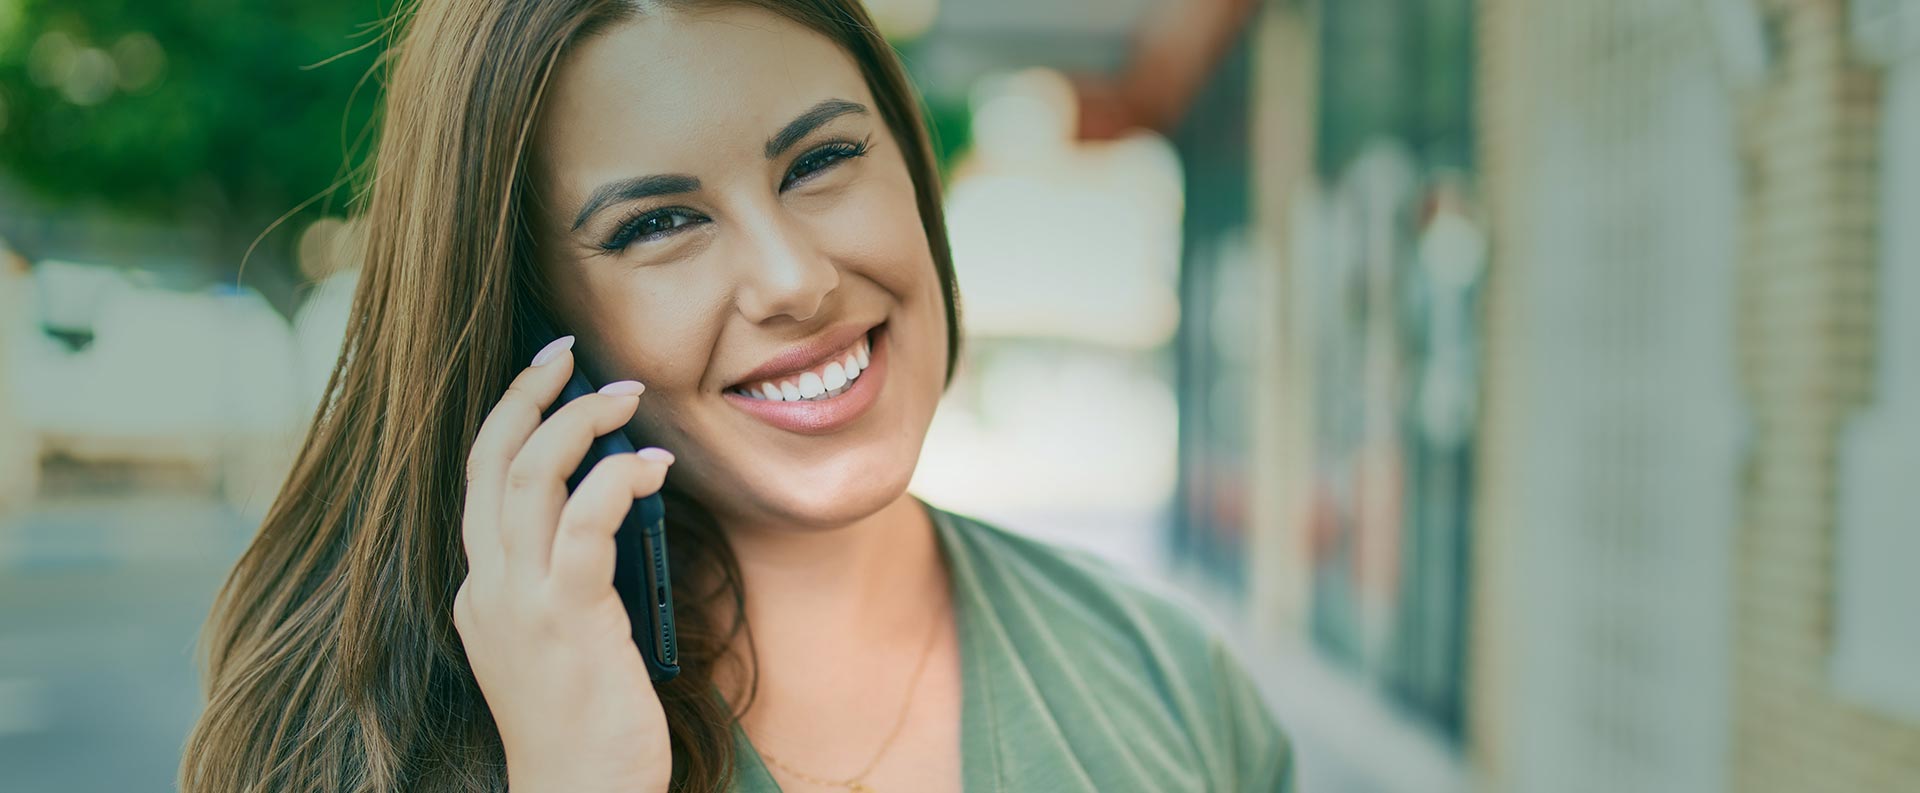 Woman answering phone call while smiling